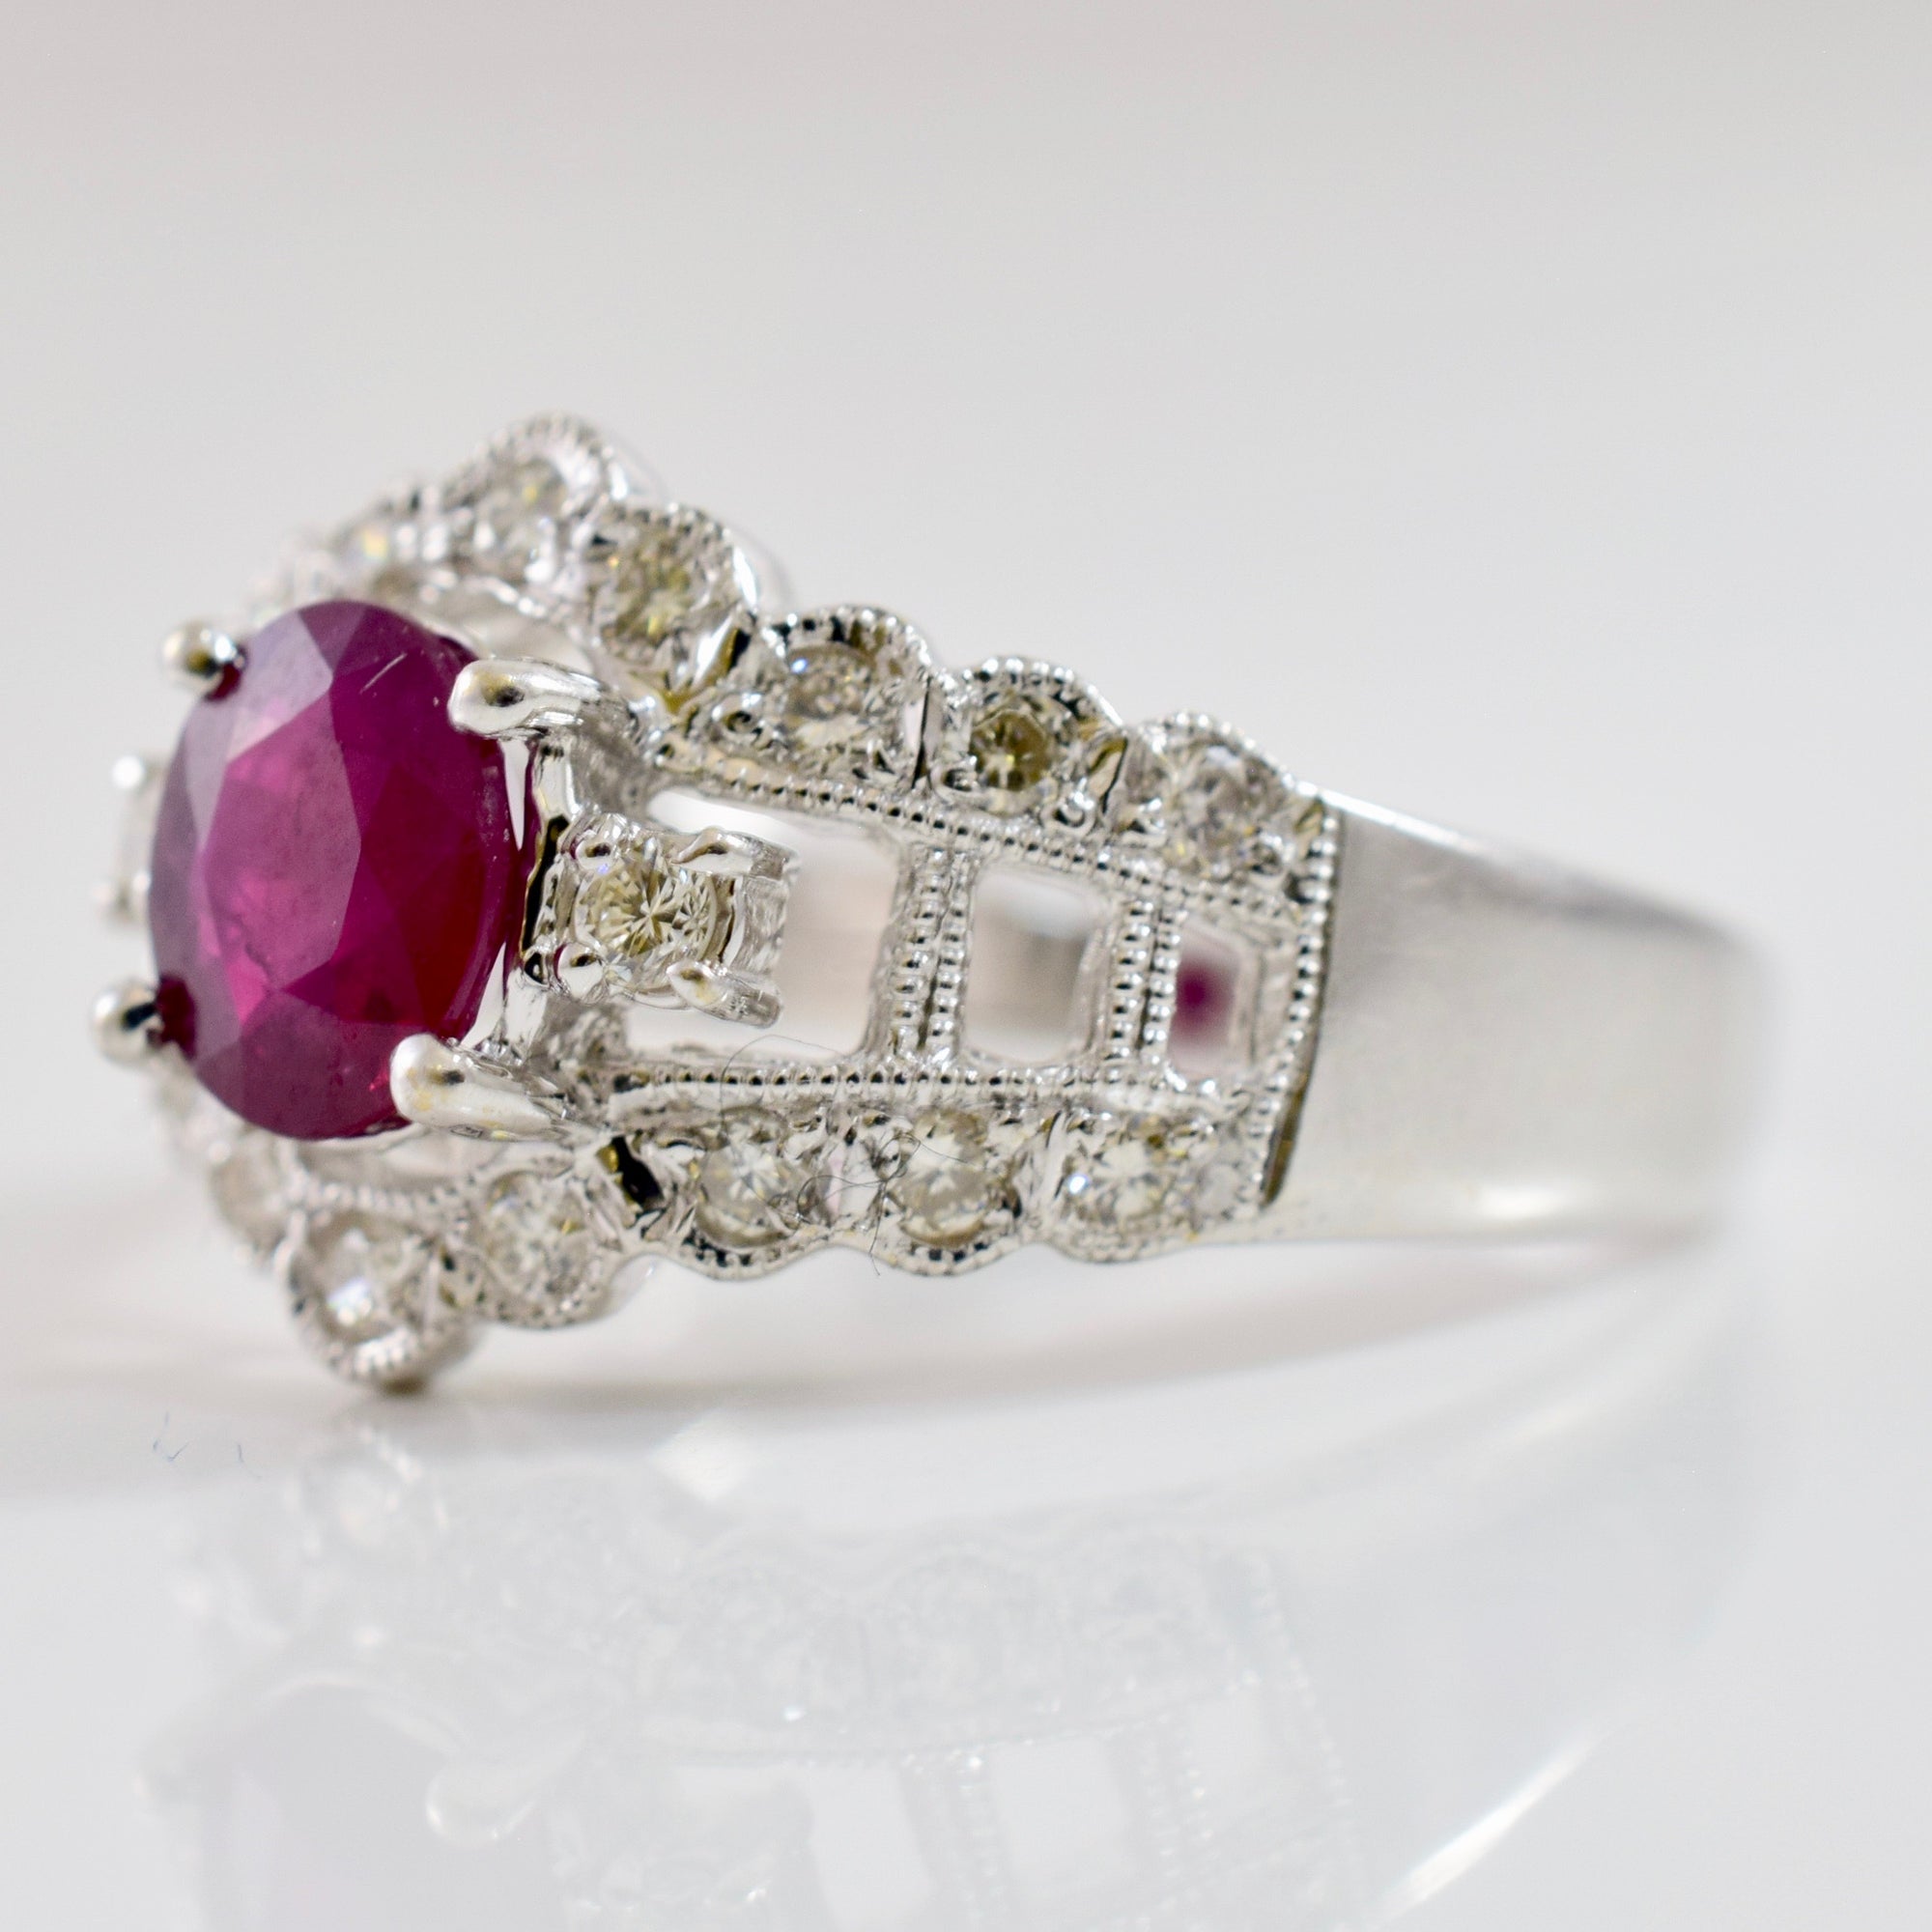 Intricate Diamond and Ruby Ring | 0.22 ctw SZ 5.25 |